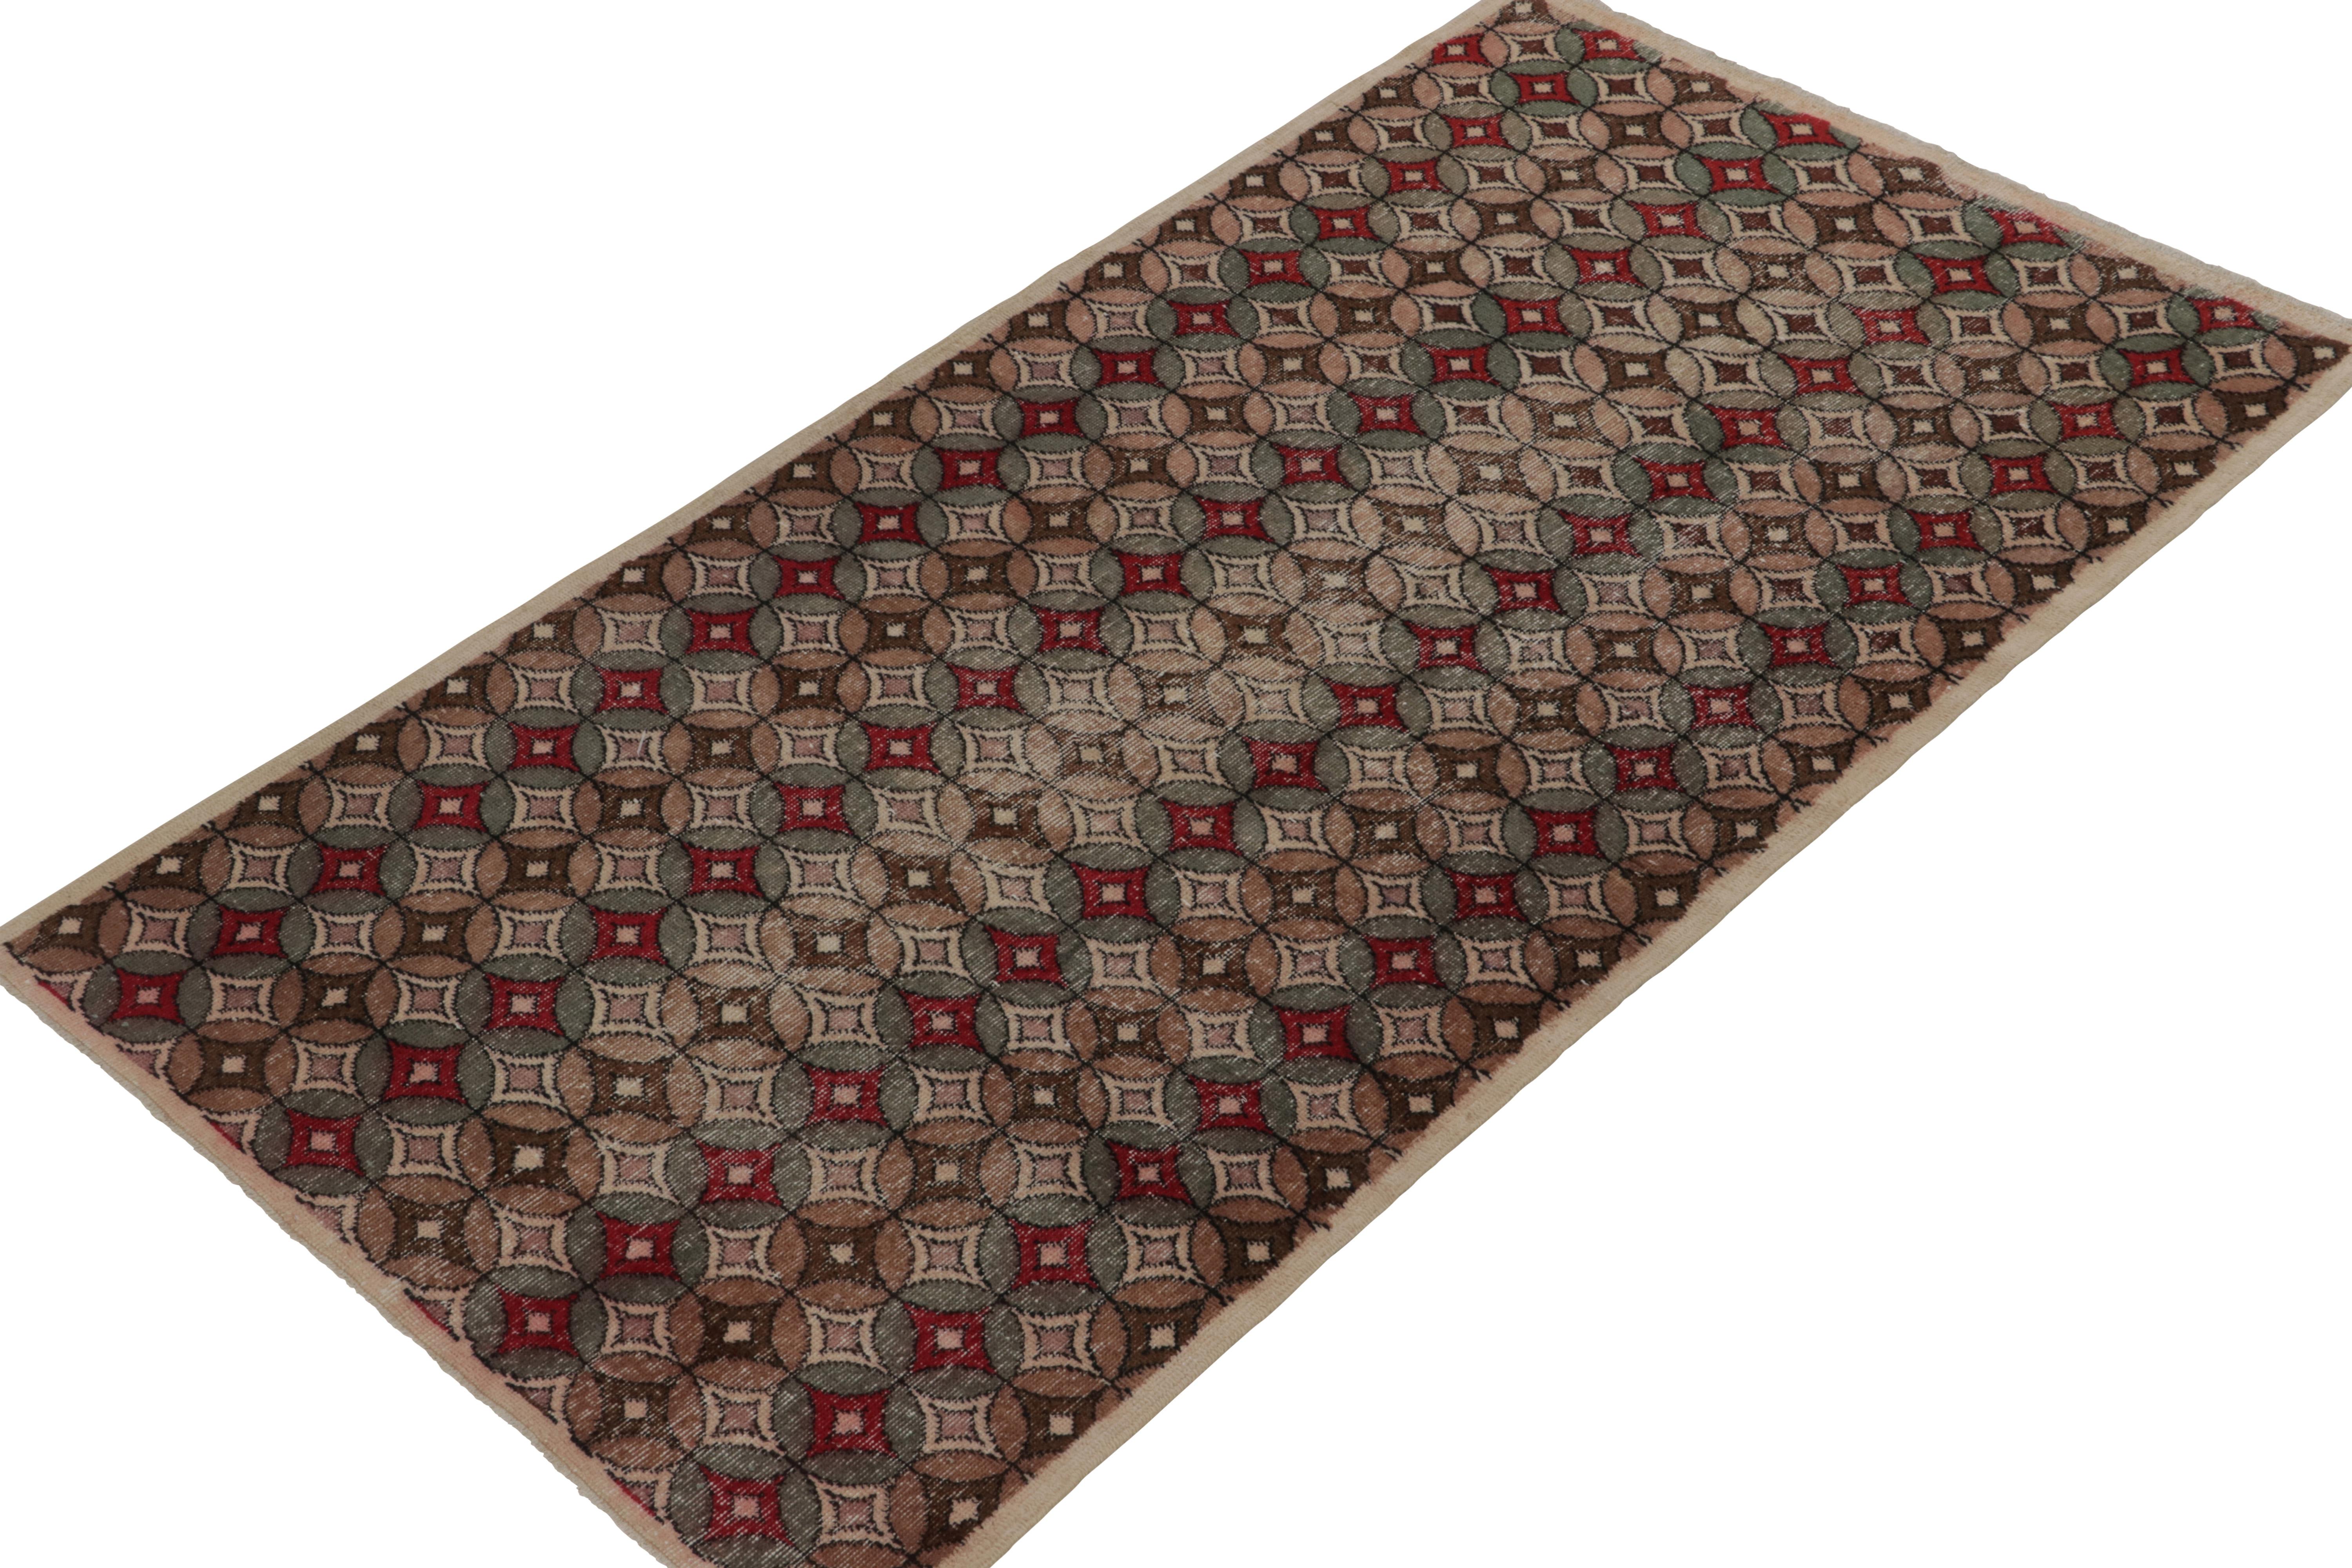 A vintage 4x8 mid-century rug from the Mid-Century Pasha Collection by Rug & Kilim, hand-knotted in wool circa 1960-1960. Joining a curation elebrating the rare styles of multi-disciplinary Turkish icon, Zeki Müren. 

On the Design: This piece is